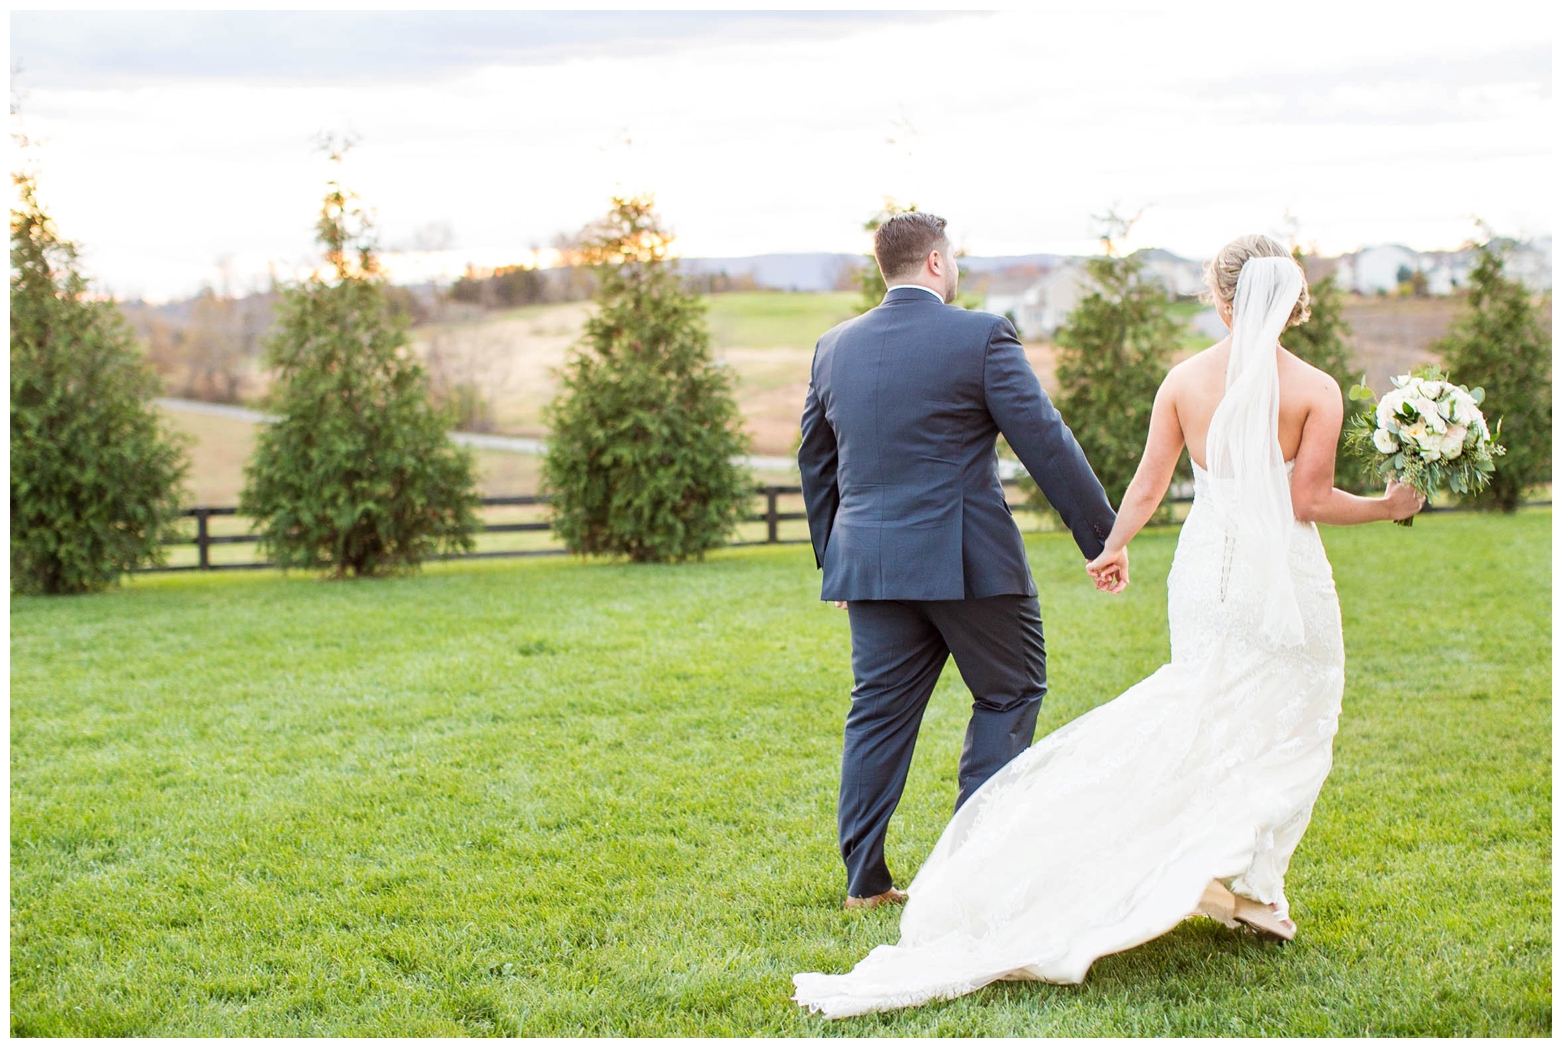 View More: http://hopetaylorphotographyphotos.pass.us/lynsay-and-brian